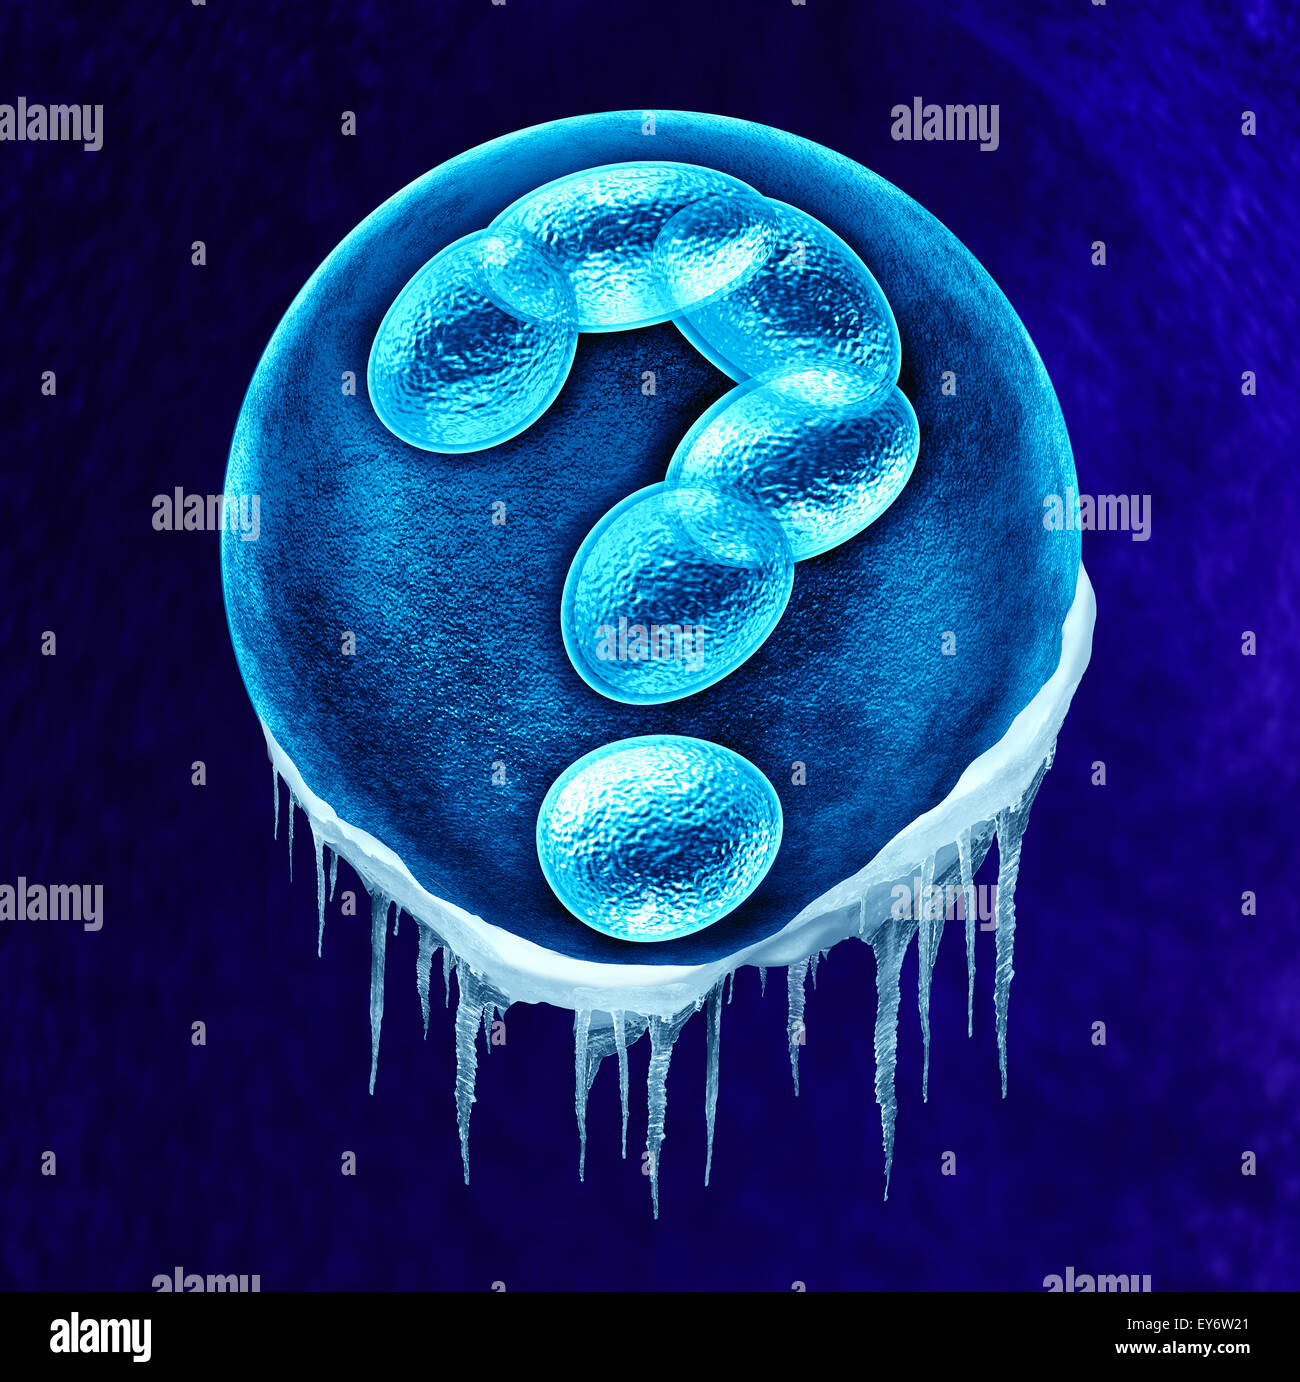 Frozen embryo concept and genetic and legal questions as a social issue or medical health care idea with a fertilized human egg Stock Photo